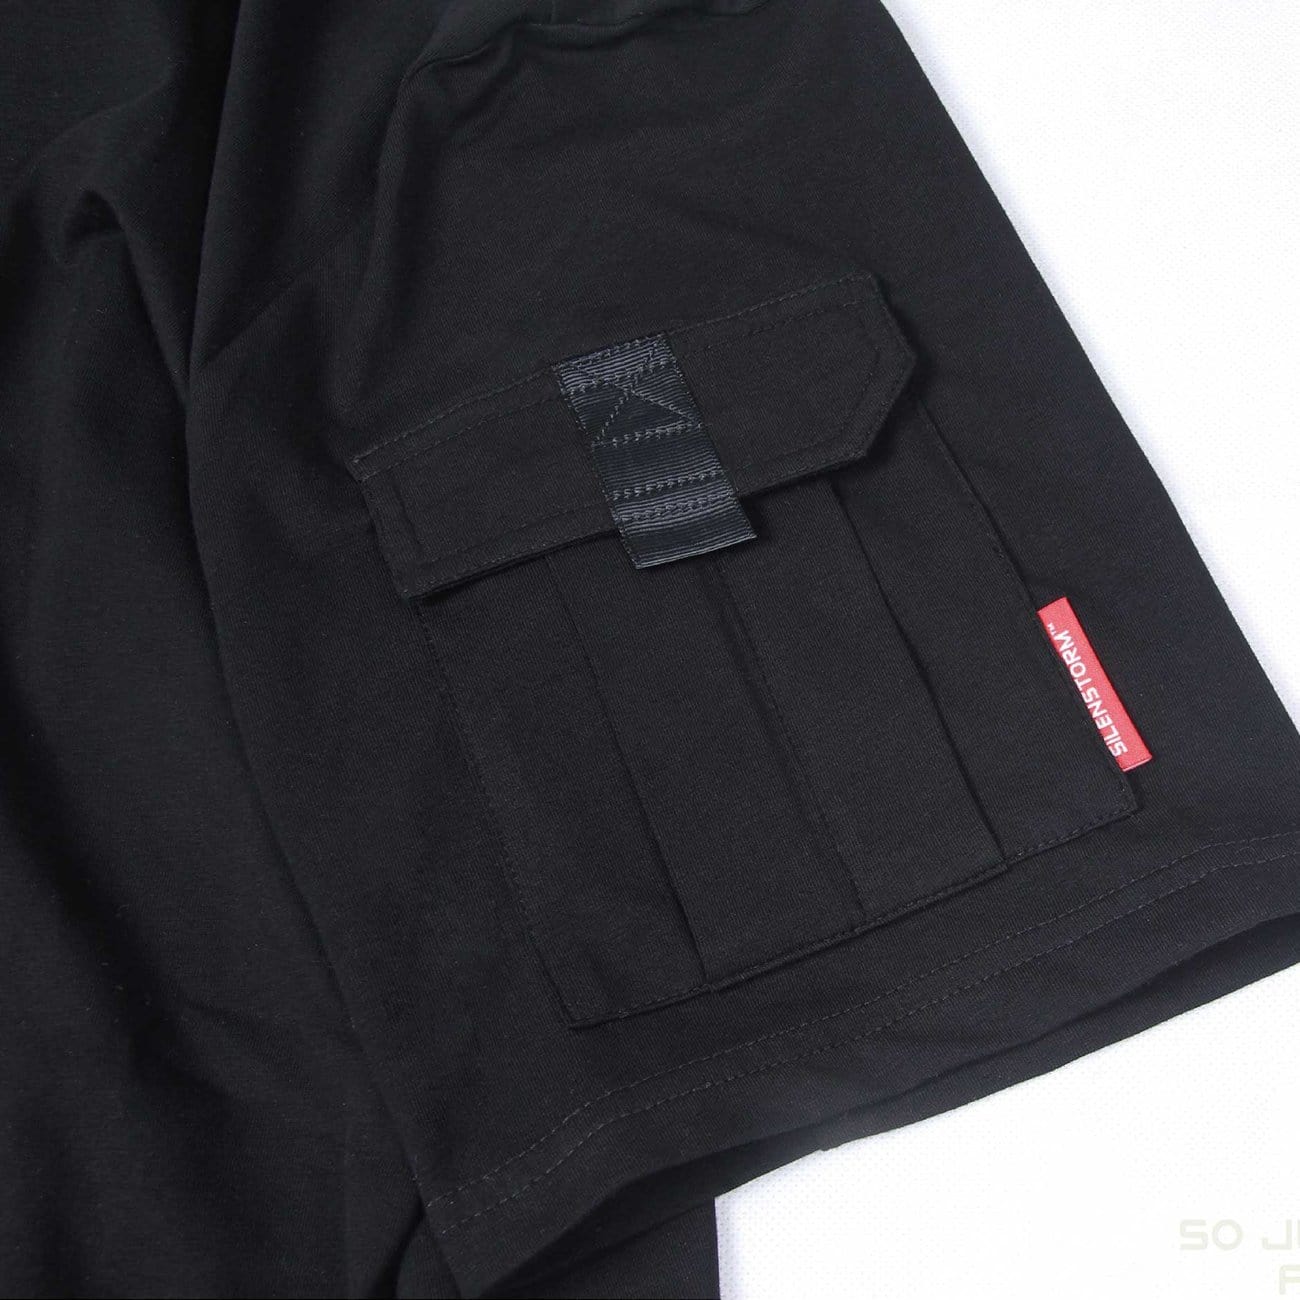 TO Cyberpunk Functional Pocket Cotton Tee